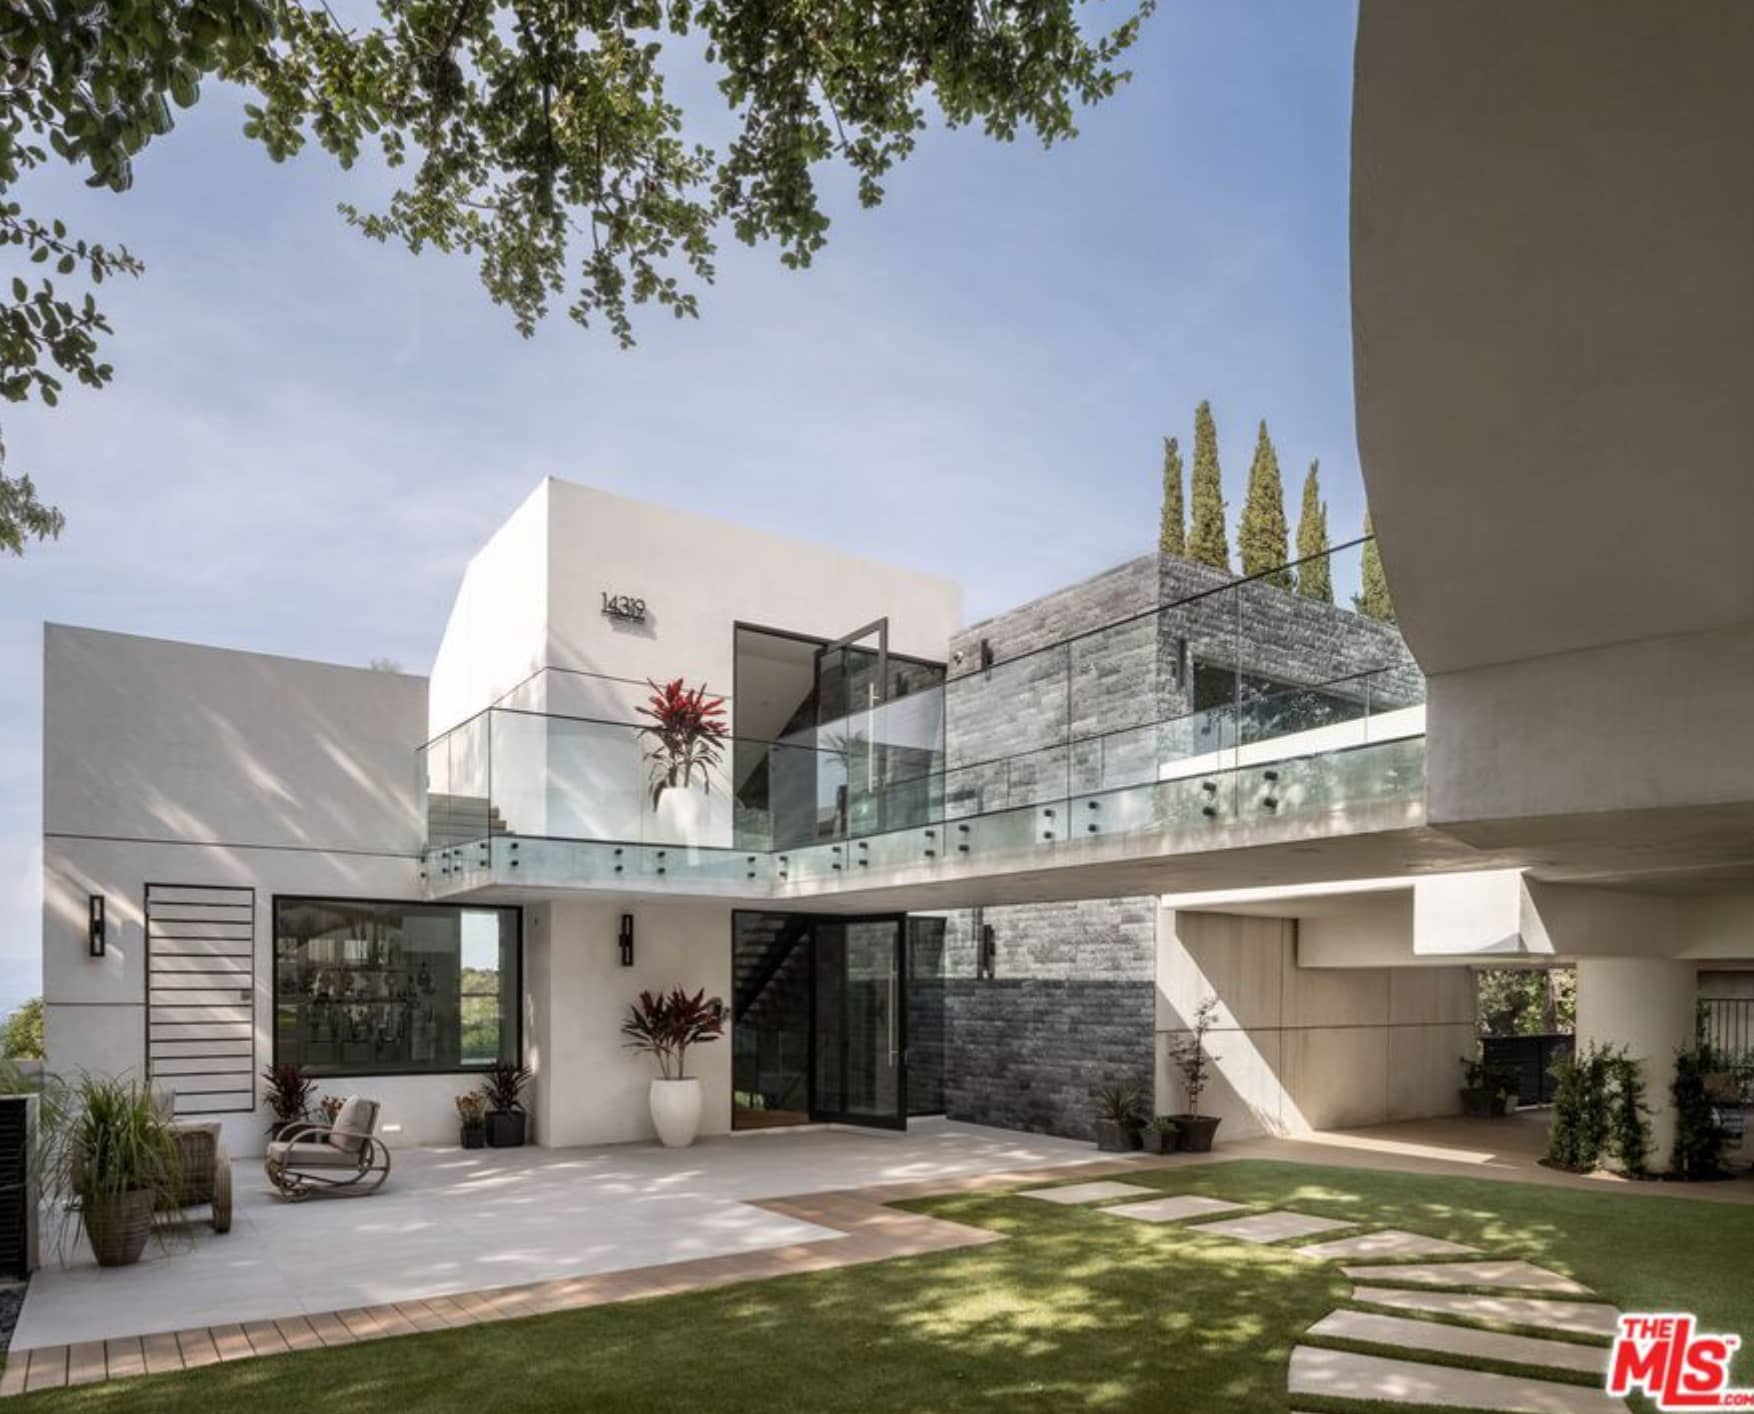 $8 Million Modern New Build In Los Angeles (PHOTOS)